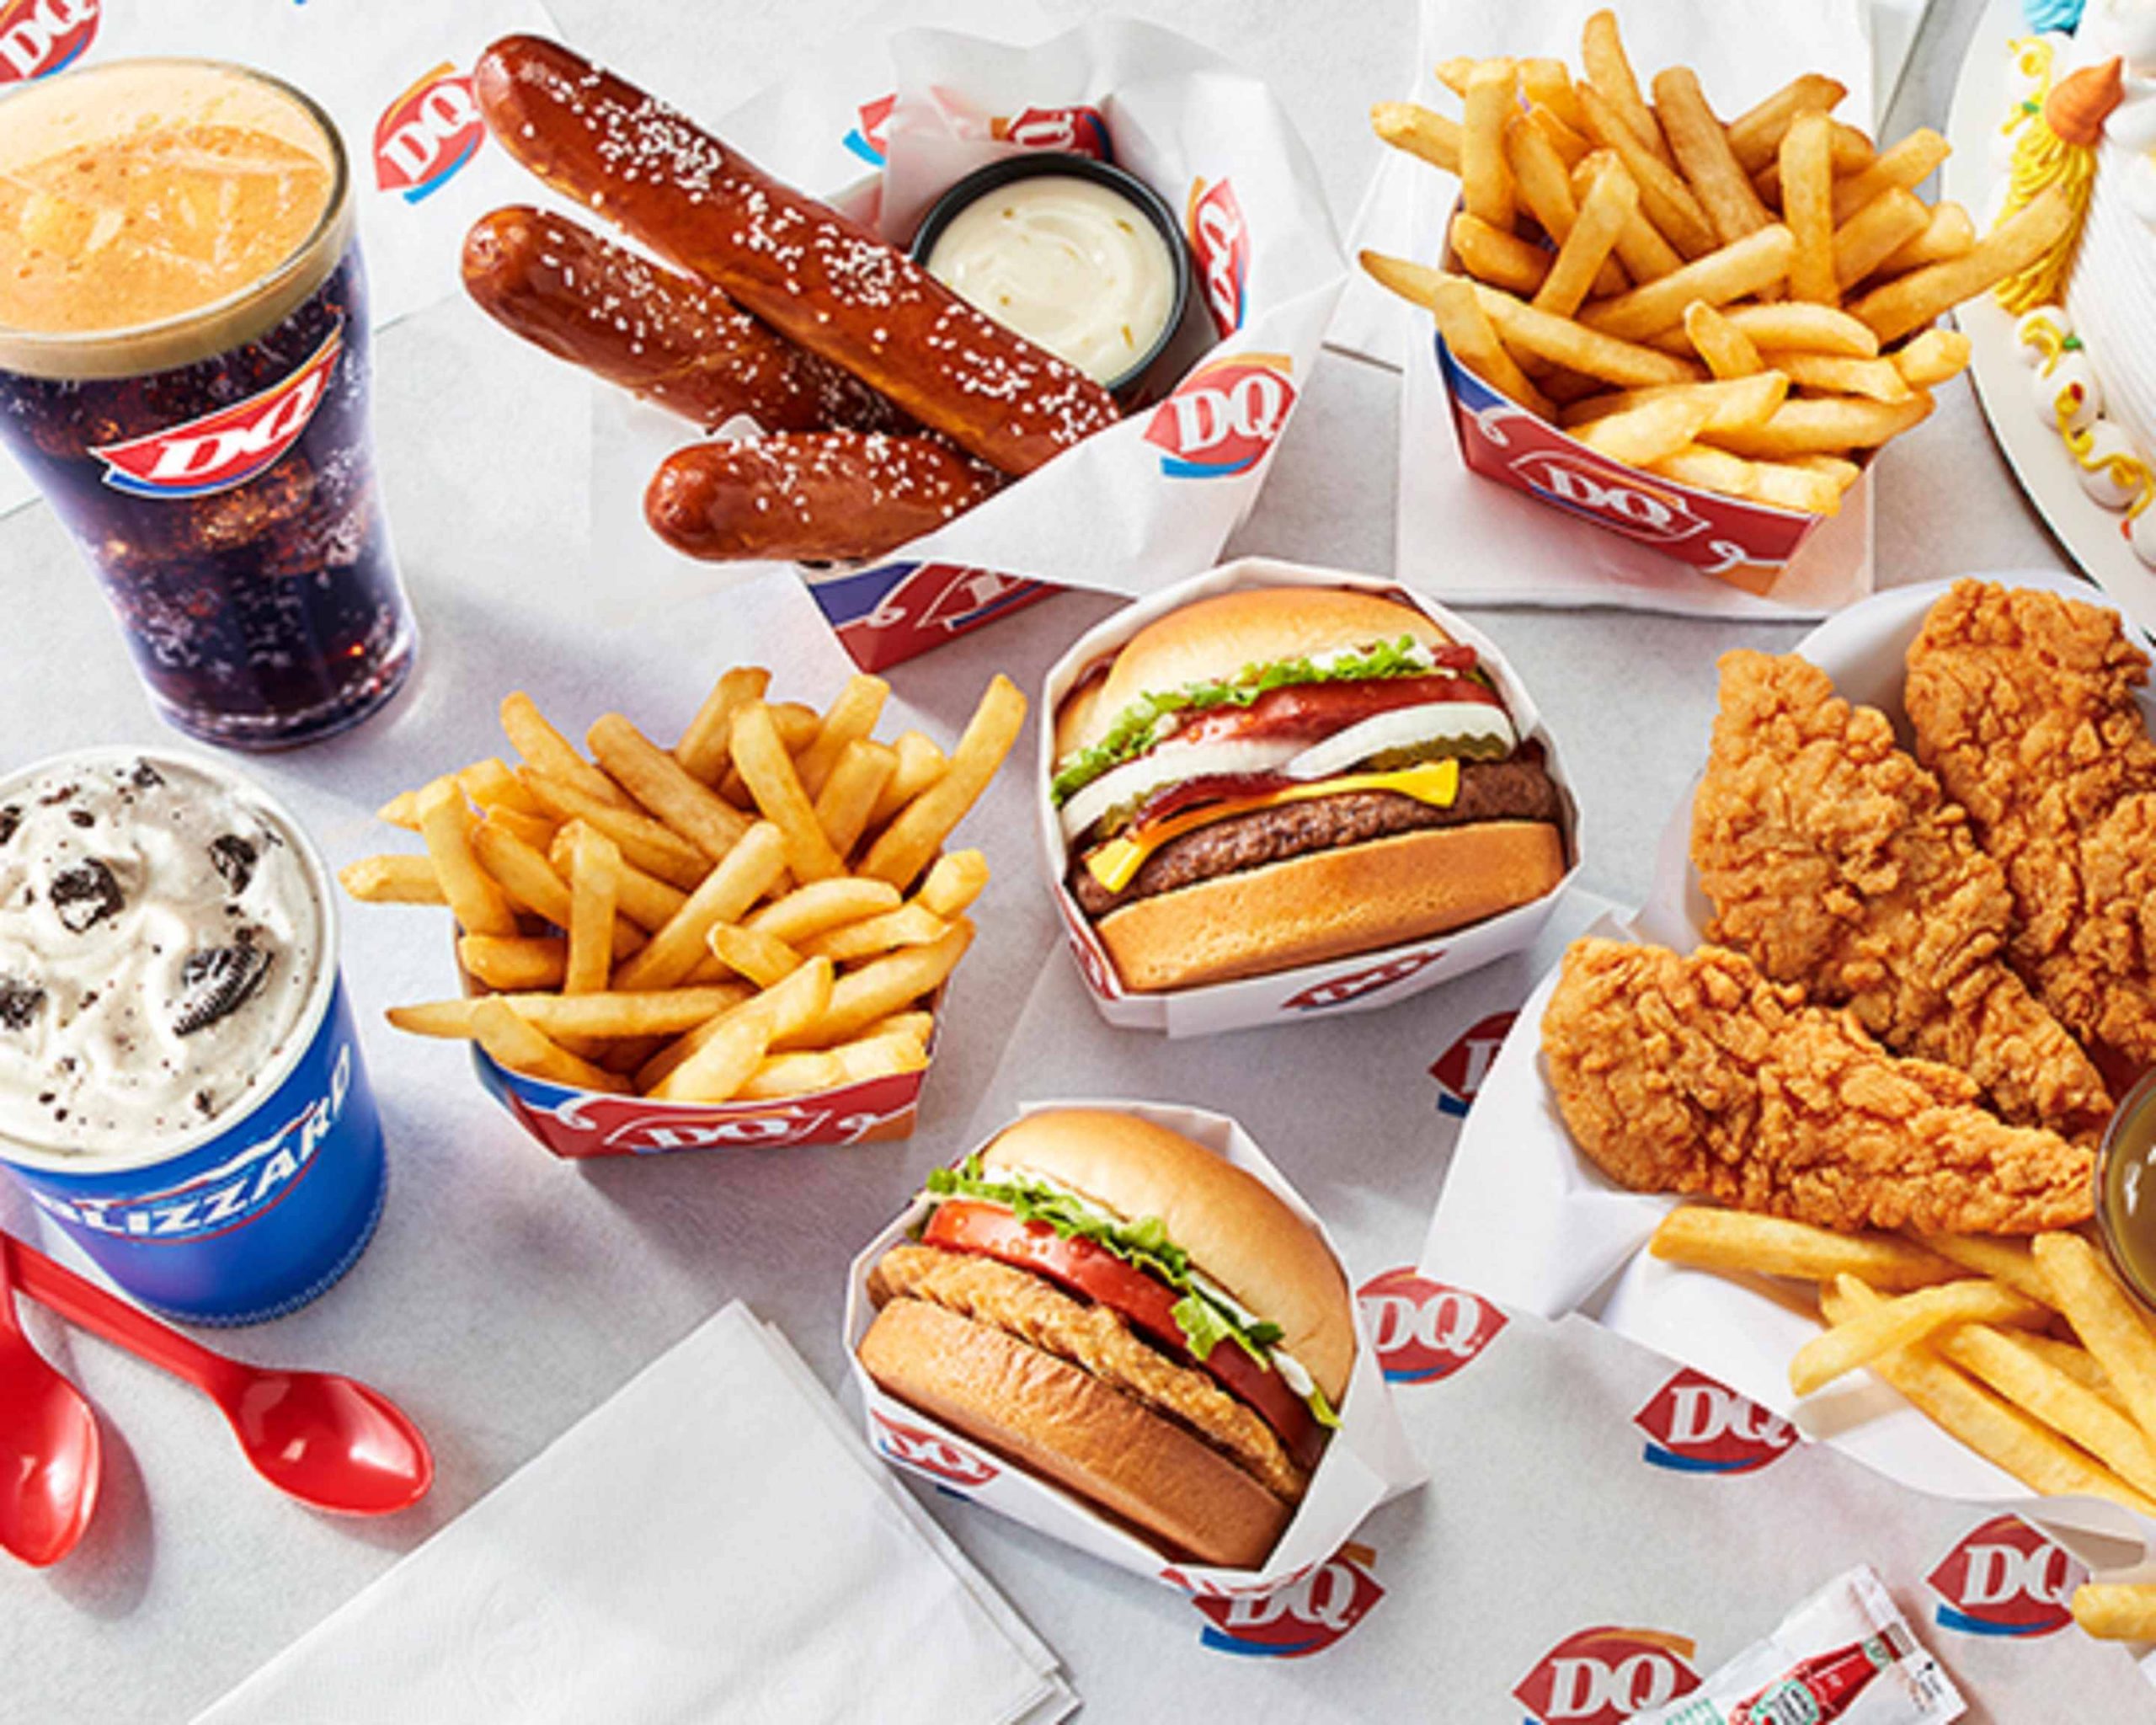 Dairy Queen Food ; Burgers, Glaces, Frites